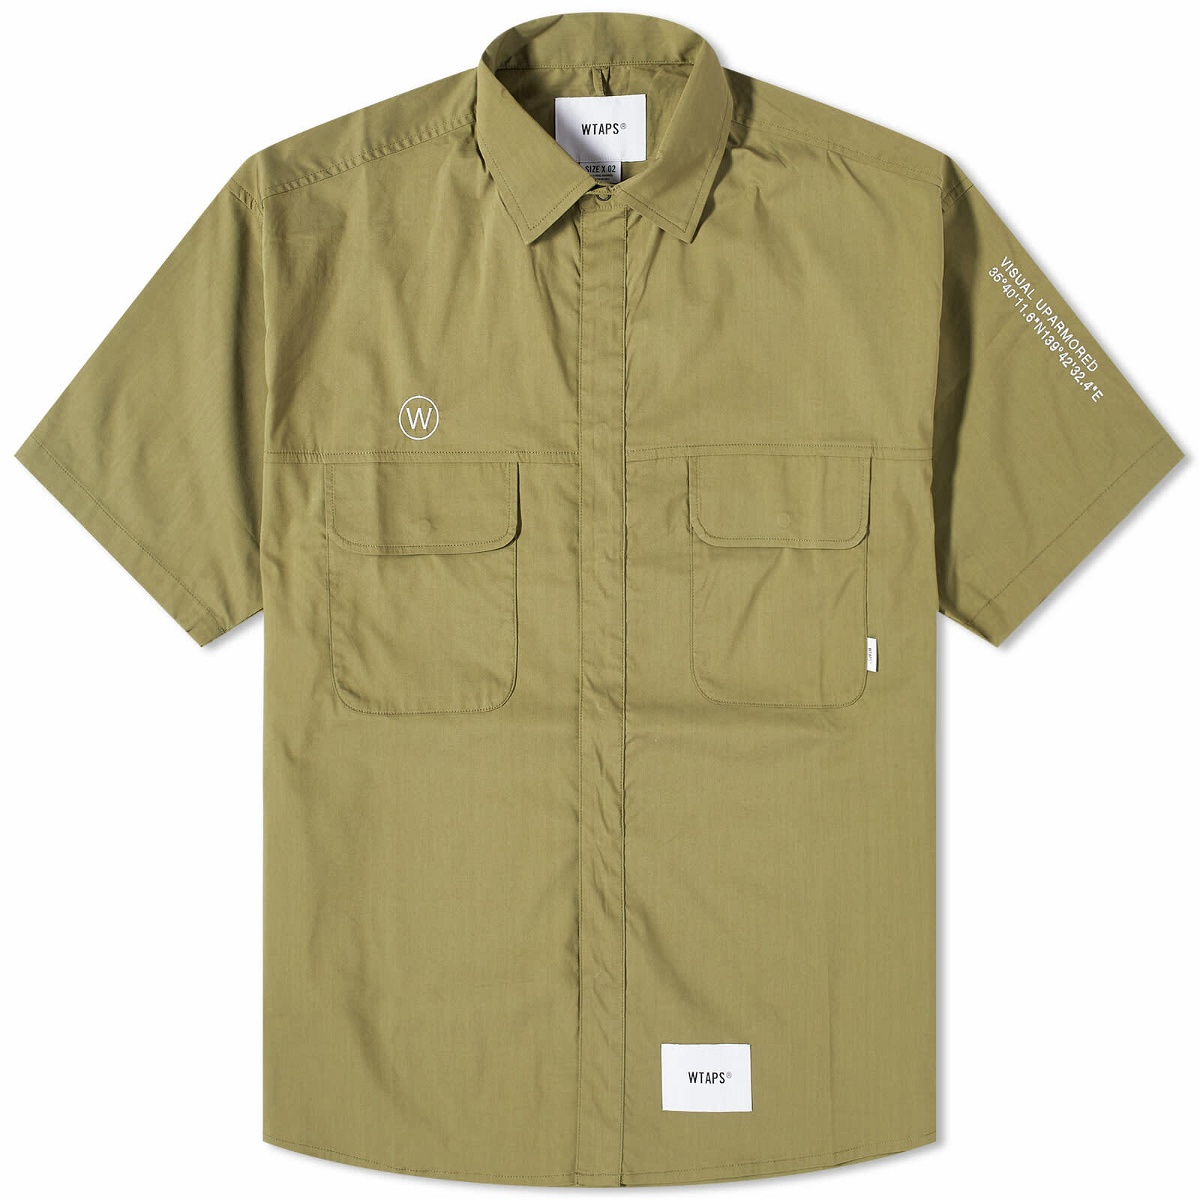 Photo: WTAPS Men's 8 Printed Short Sleeve Shirt in Olive Drab